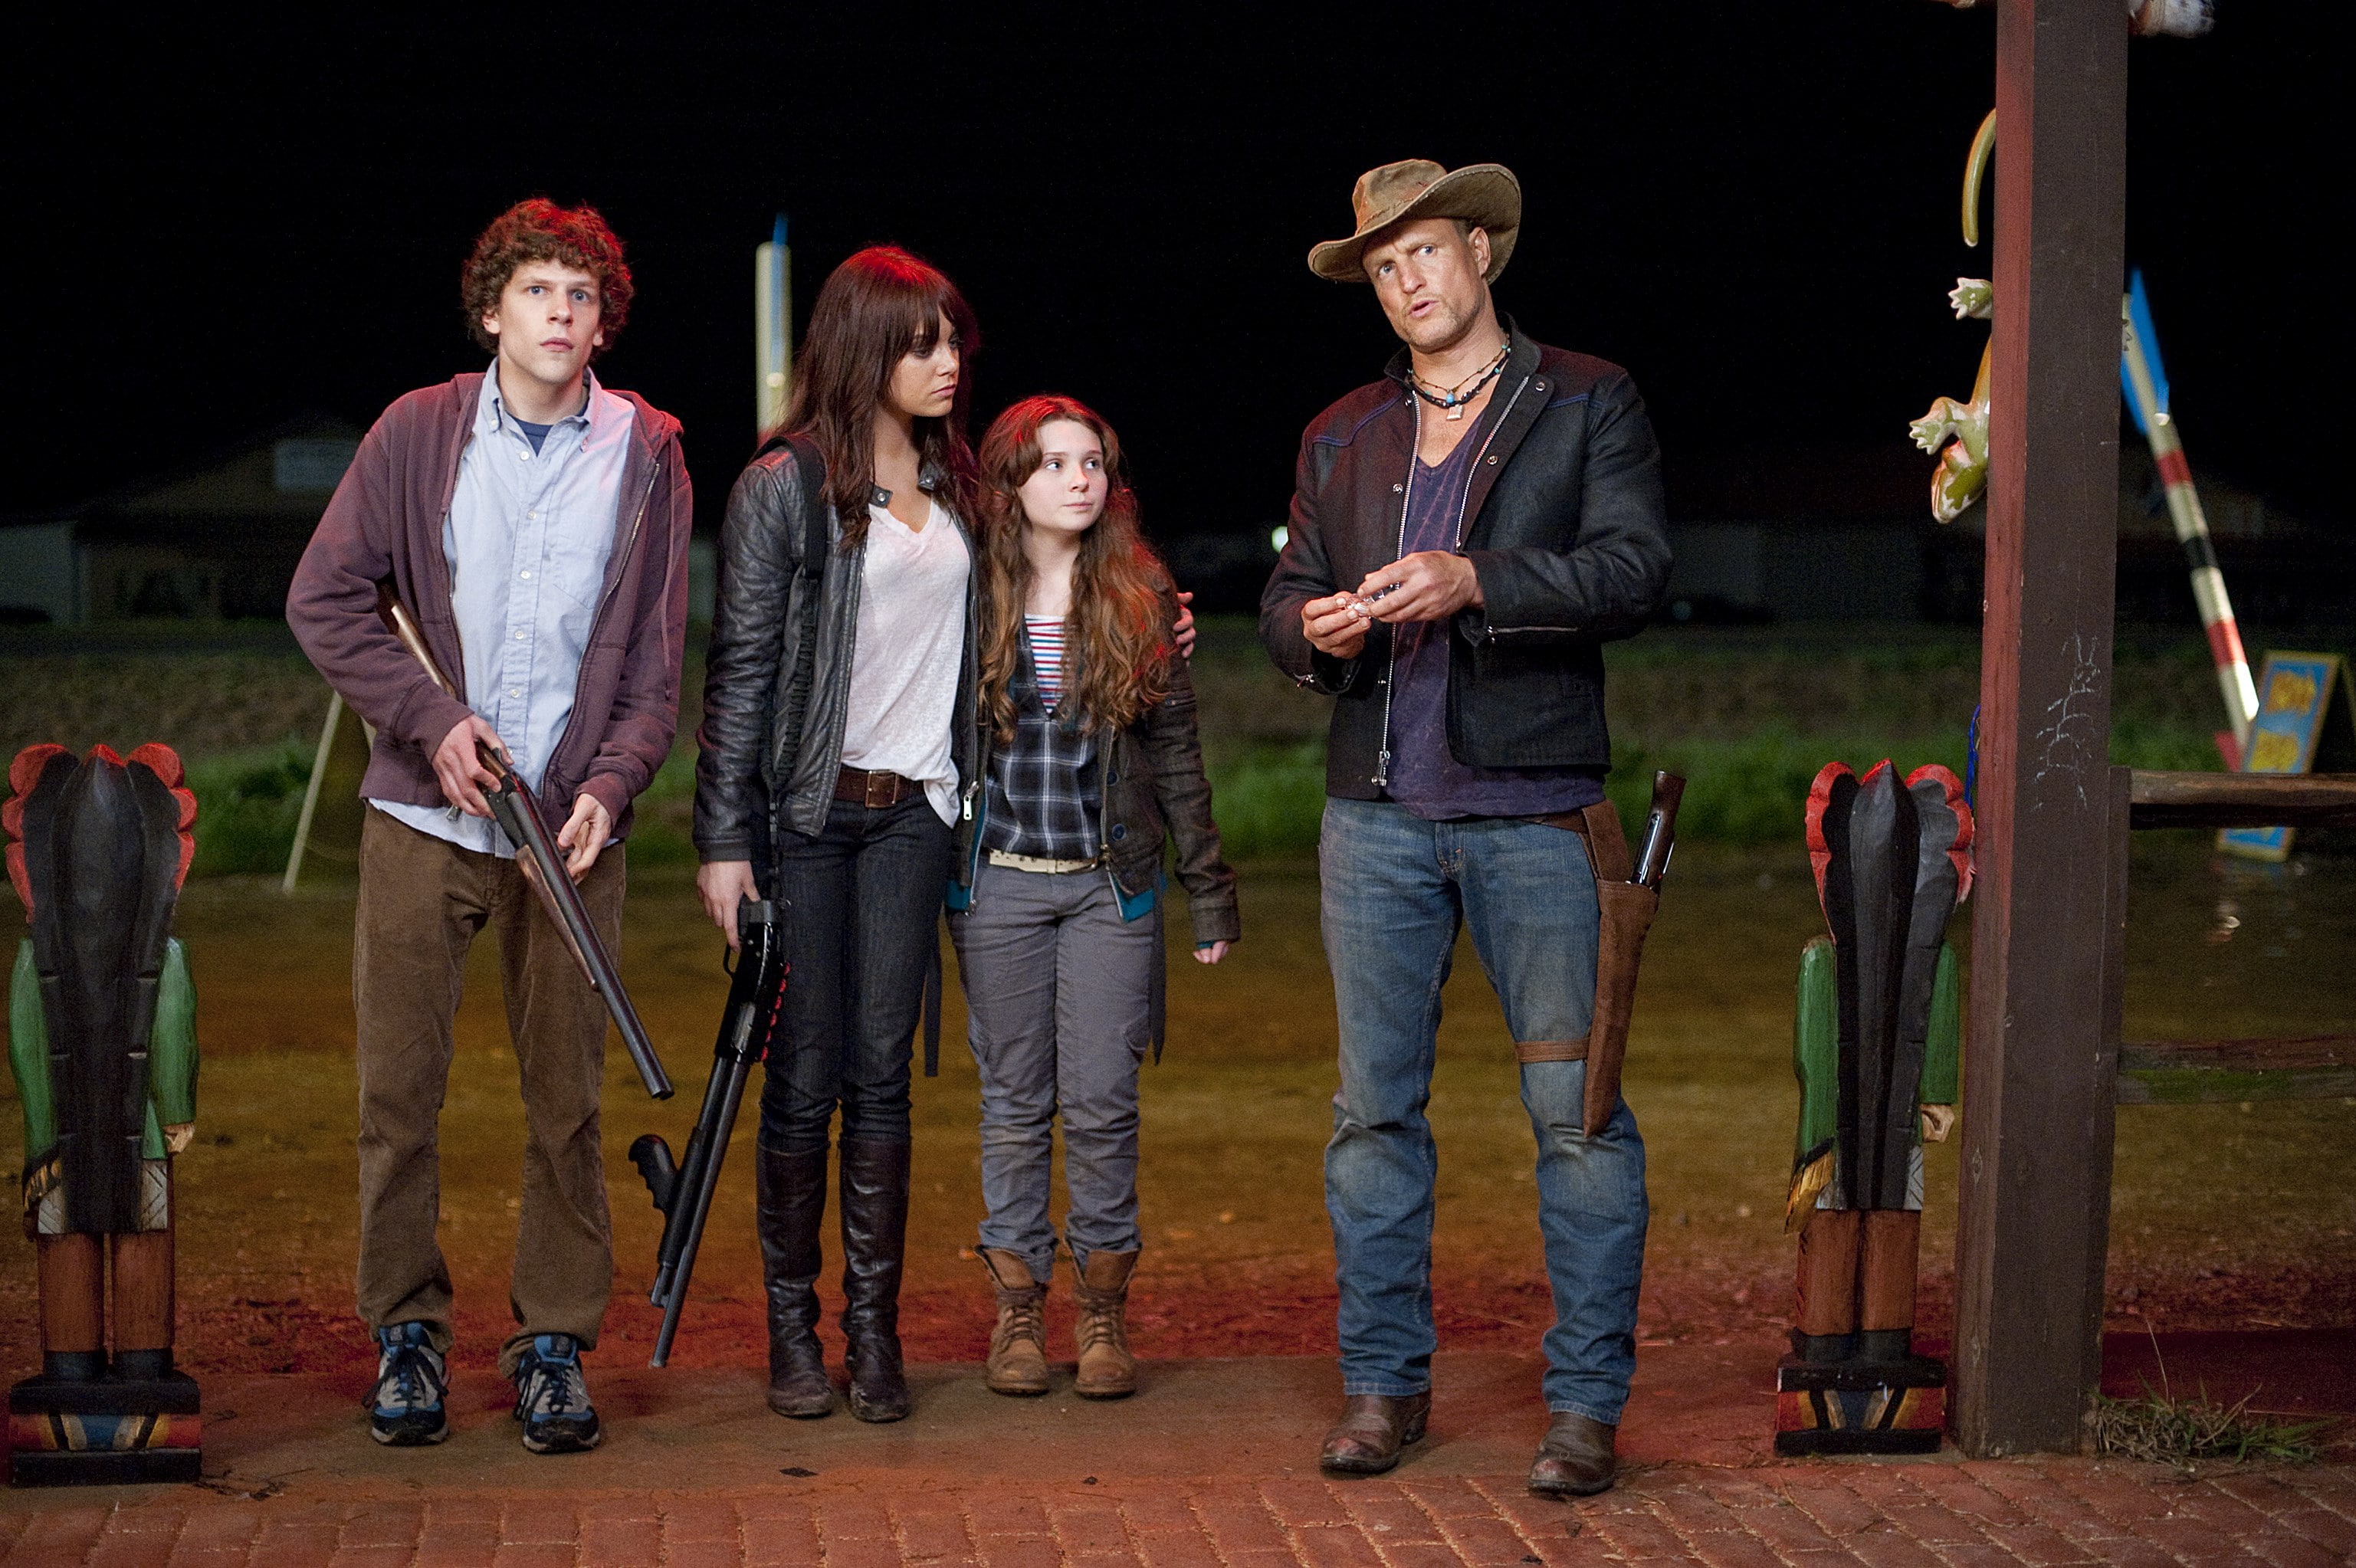 zombieland, young adult, night, men, group of people, young men